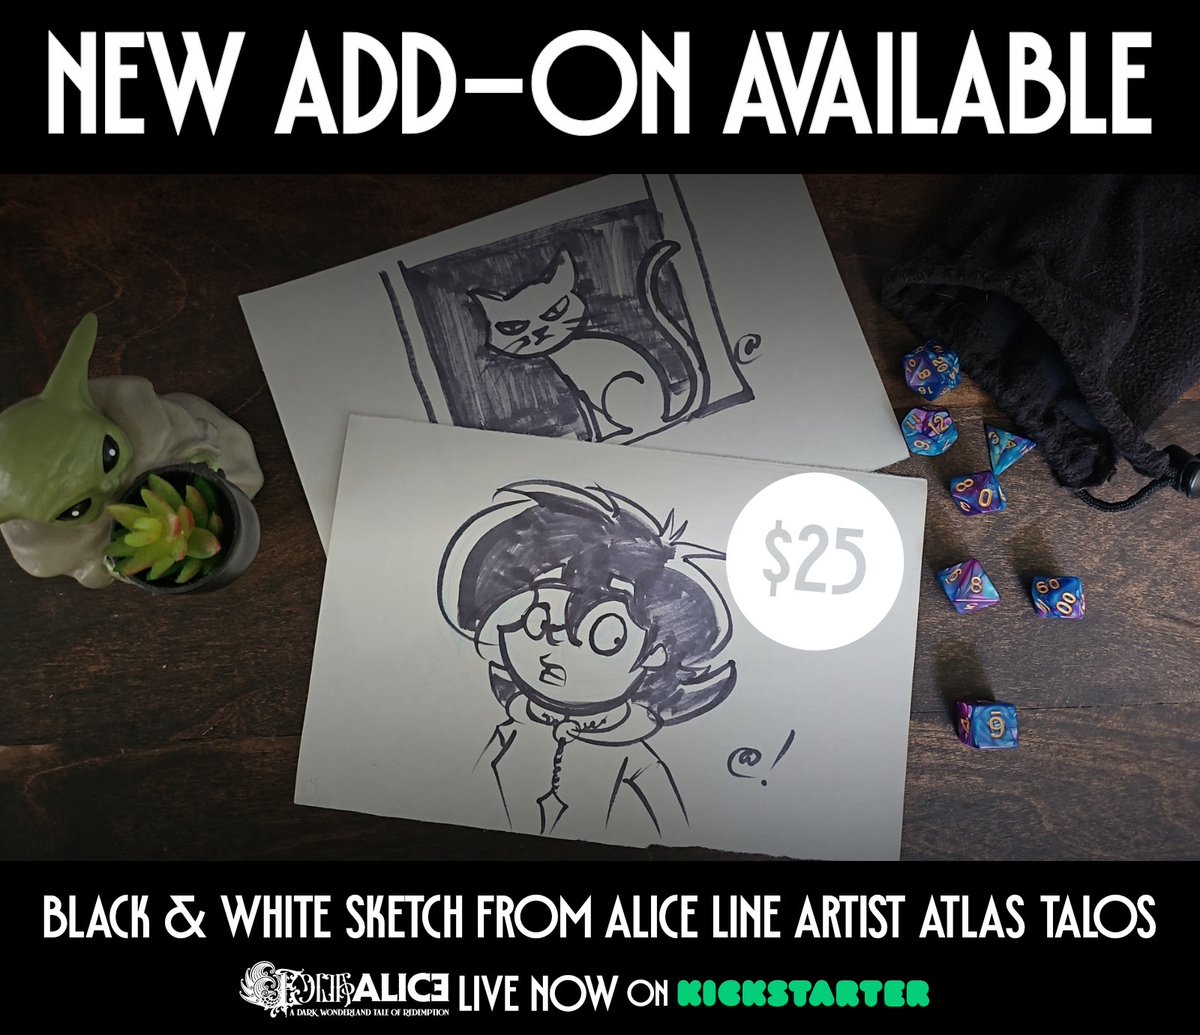 Pledge $25 and get a sketch from the talented Atlas himself. Plus a few extra goodies because why not? #comics #art #comicbooks #illustration #design #marketing #pdx #Portland #Oregon #creativestudio🌟

tinyurl.com/AliceNo1